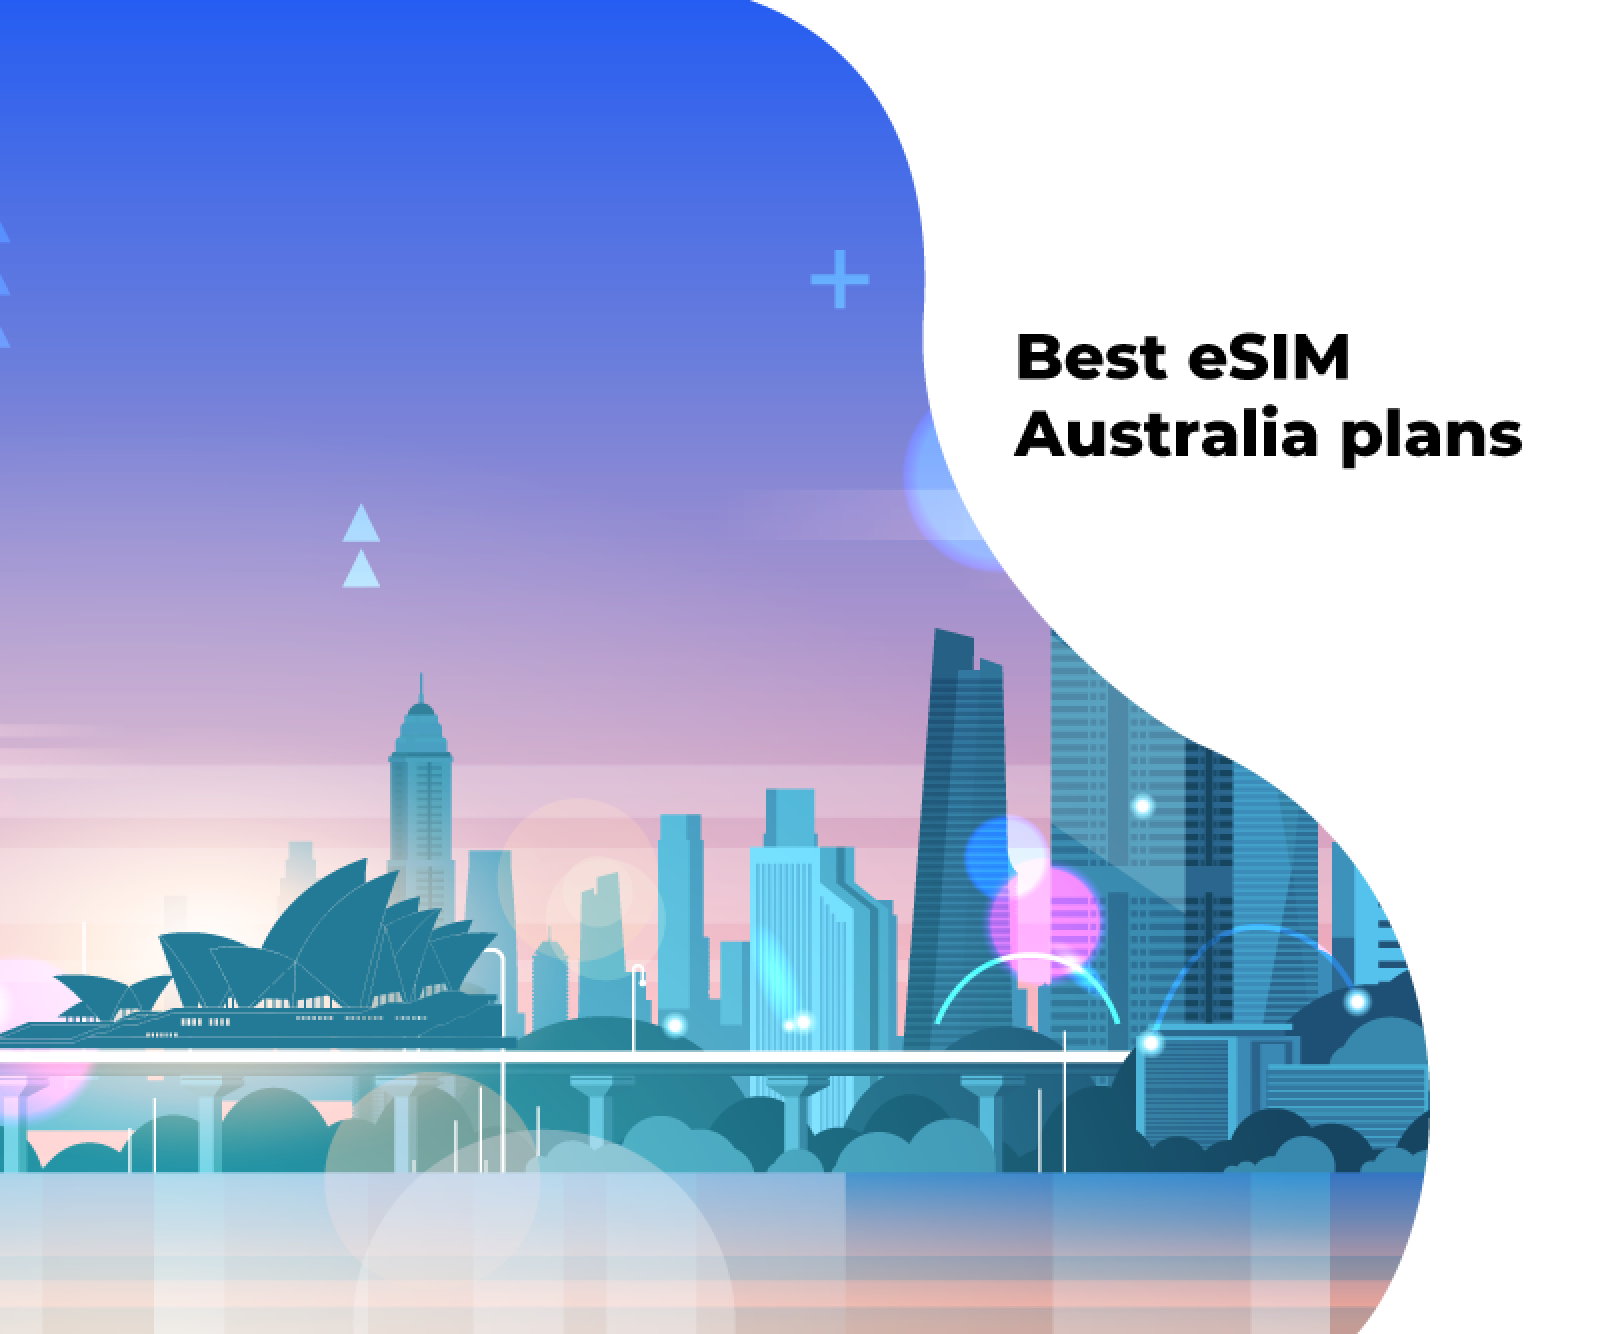 Affordable and effective eism plans in Australia.